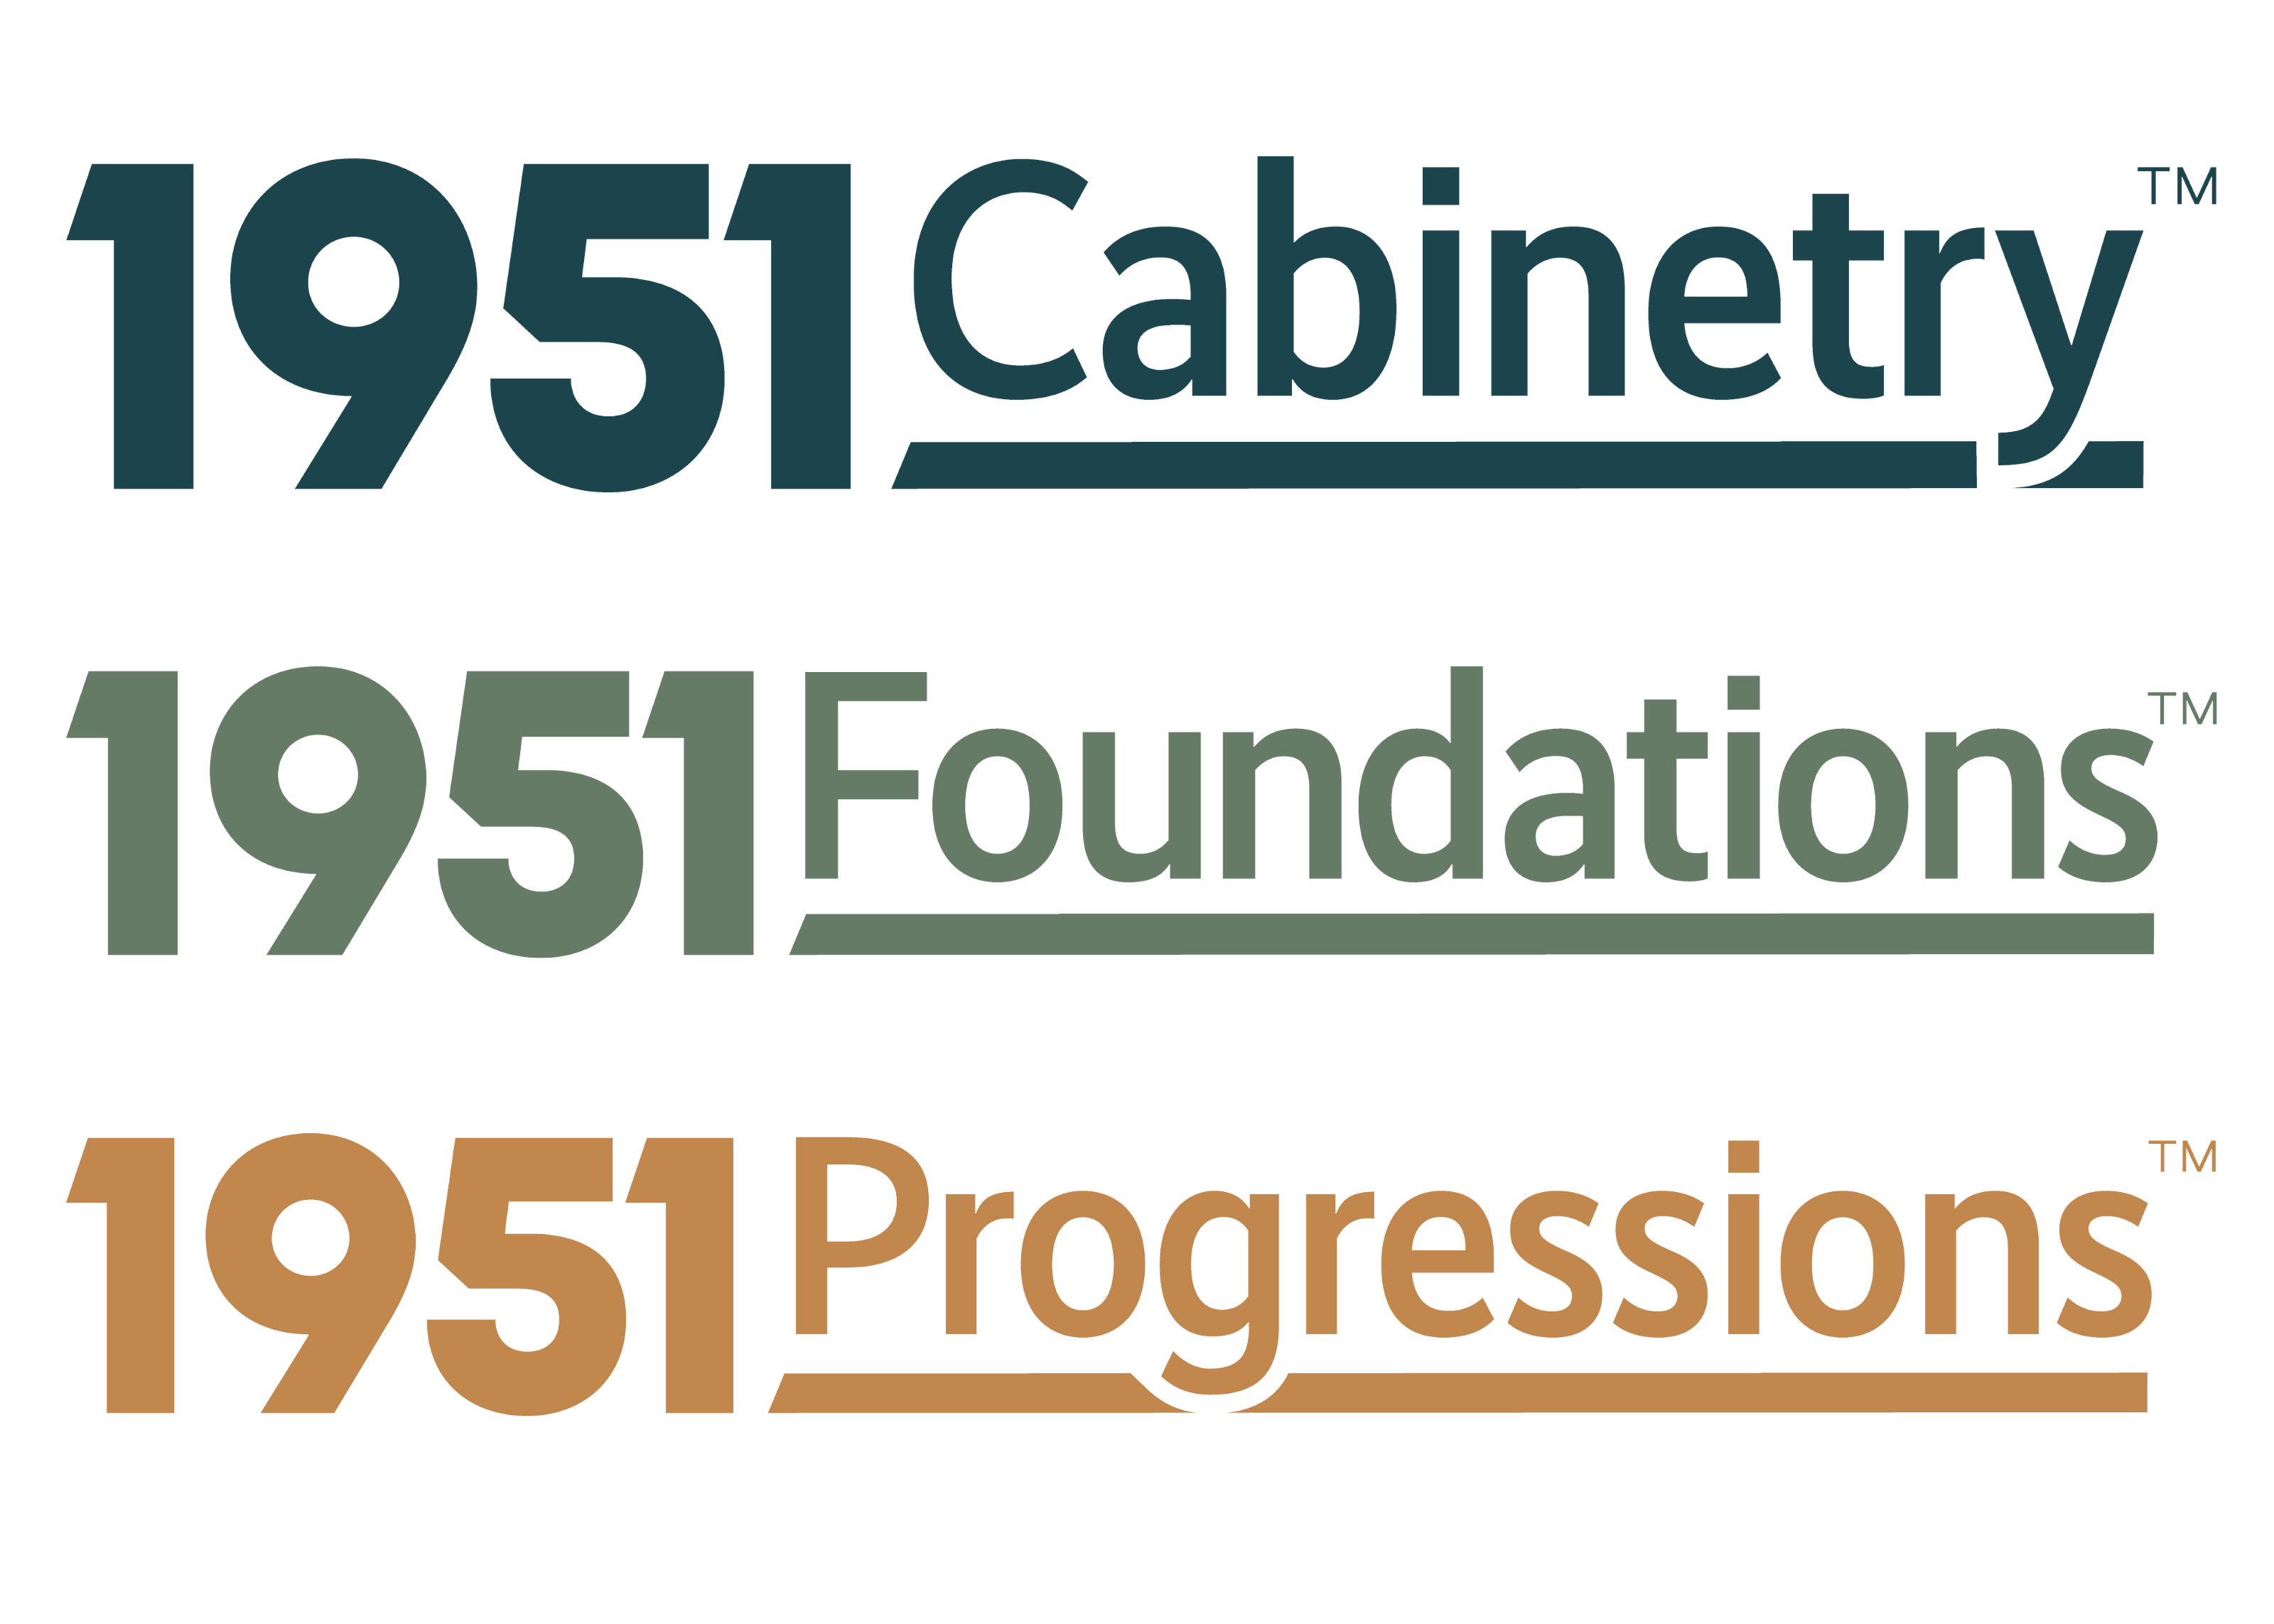 1951 cabinetry, foundations & progressions logos